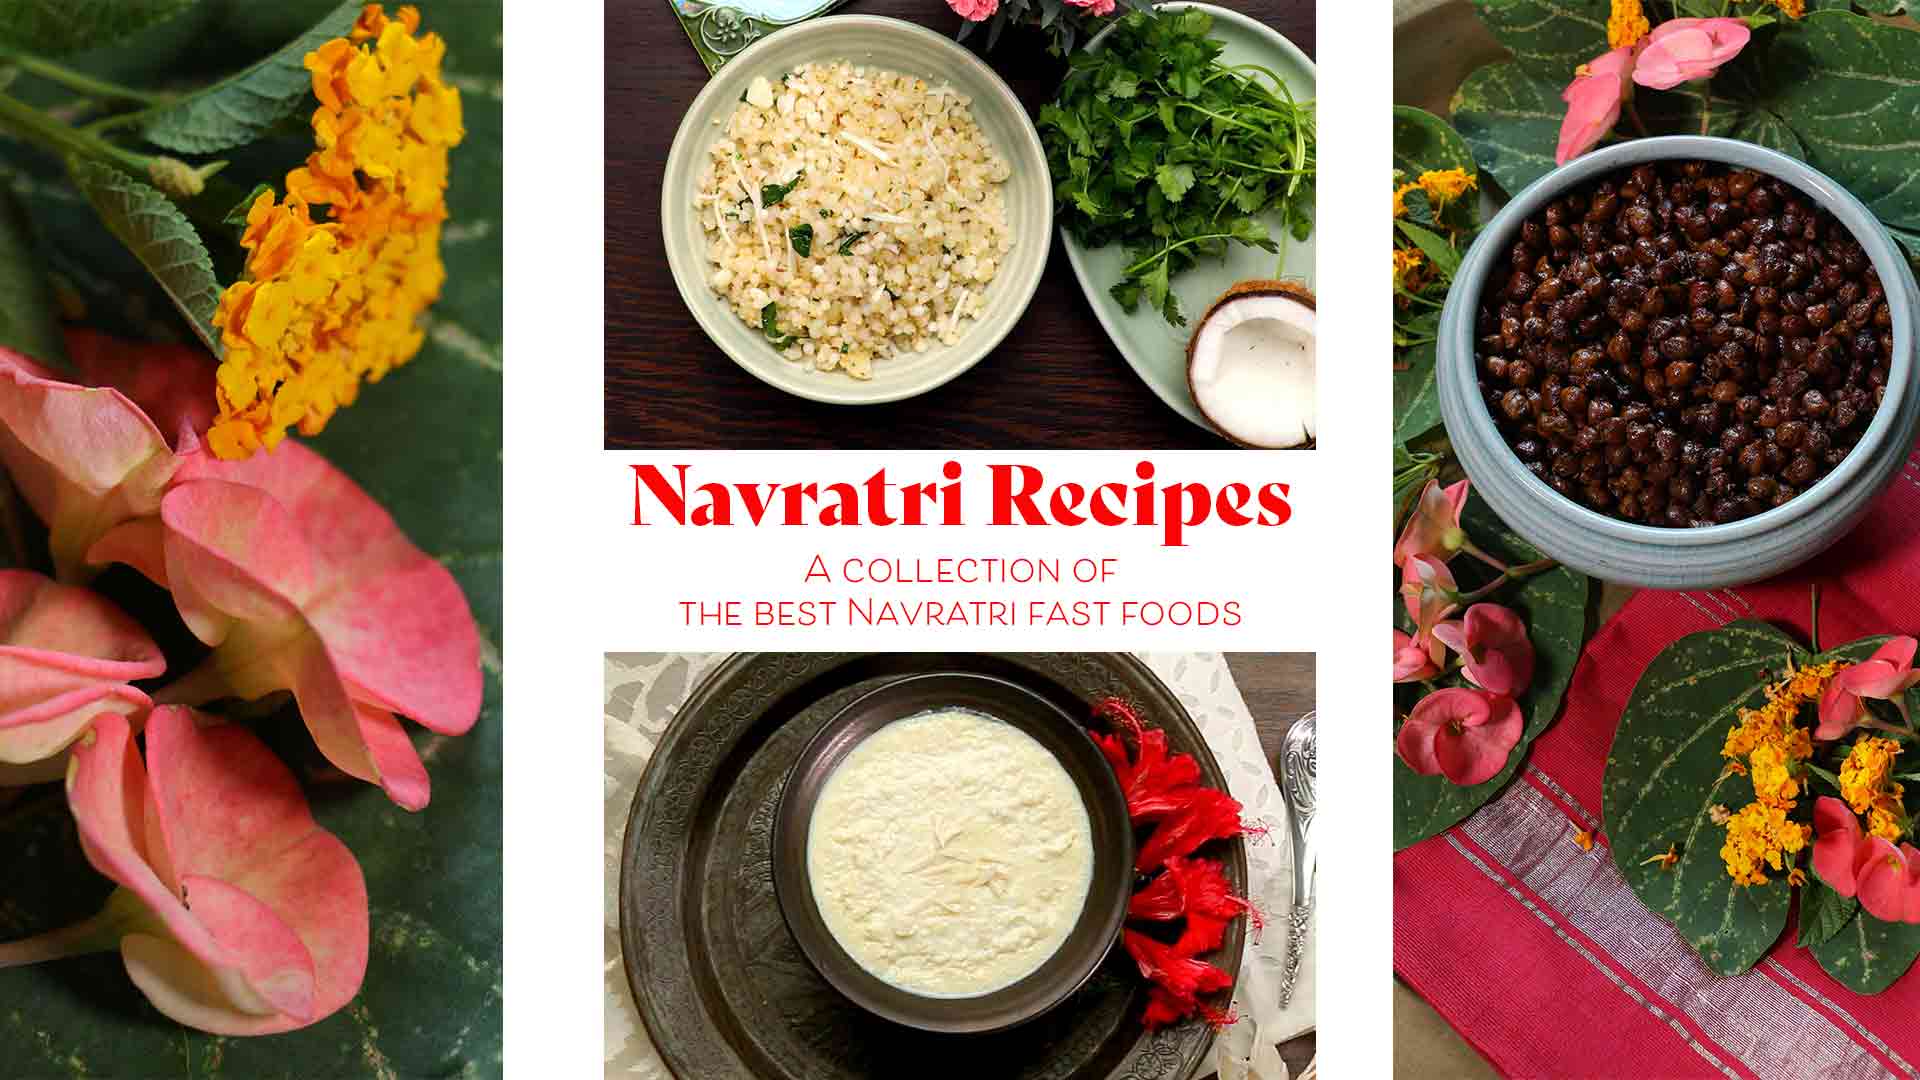 Navratri Recipes: Navratri Fasting Recipes | A collection of the best Navratri fast foods